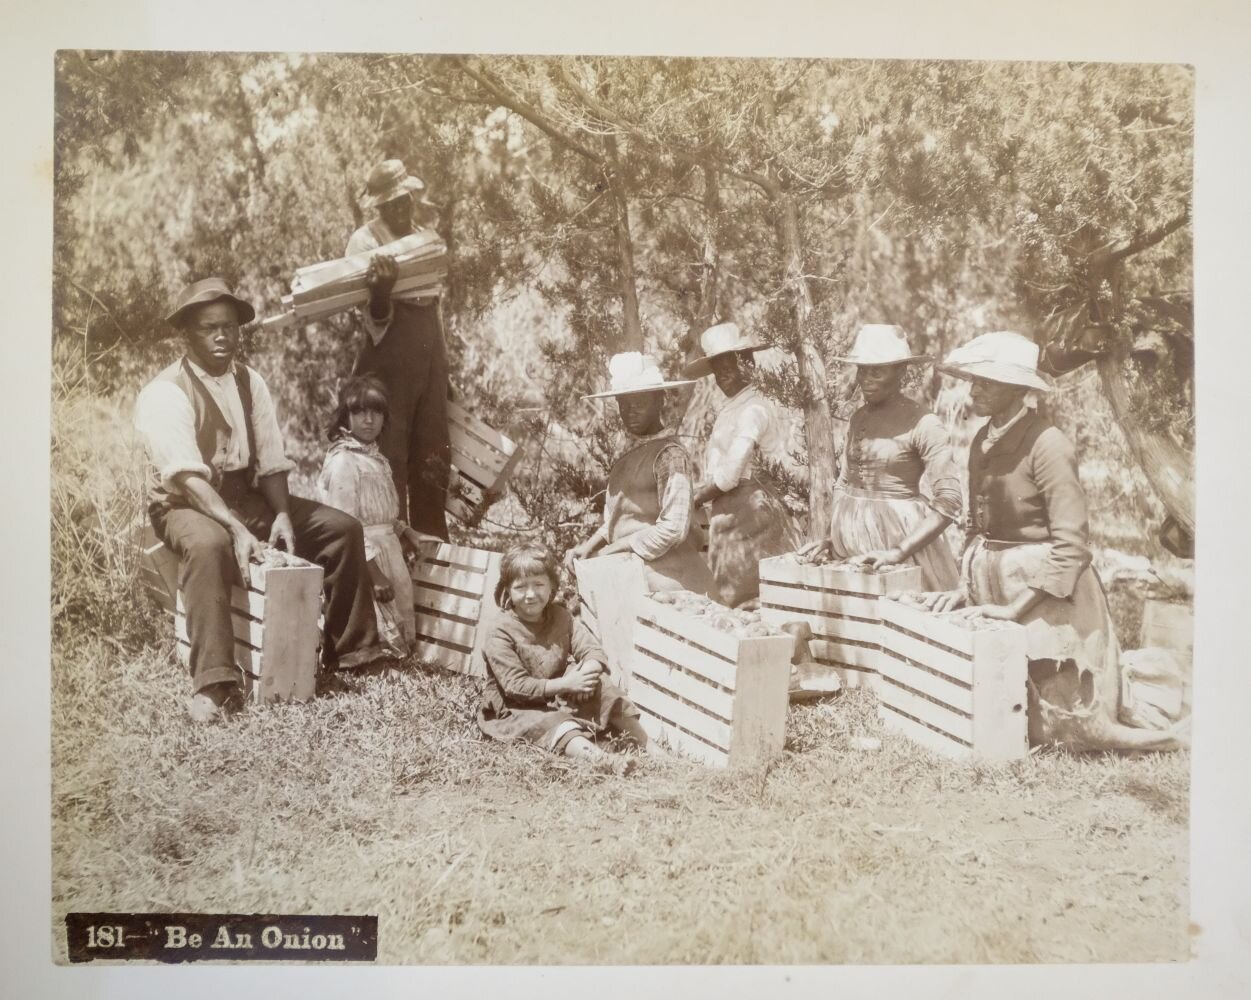 Bermudian onion farmers taking a break from their labors. Late 19th century albumen photograph (anonymous photographer)